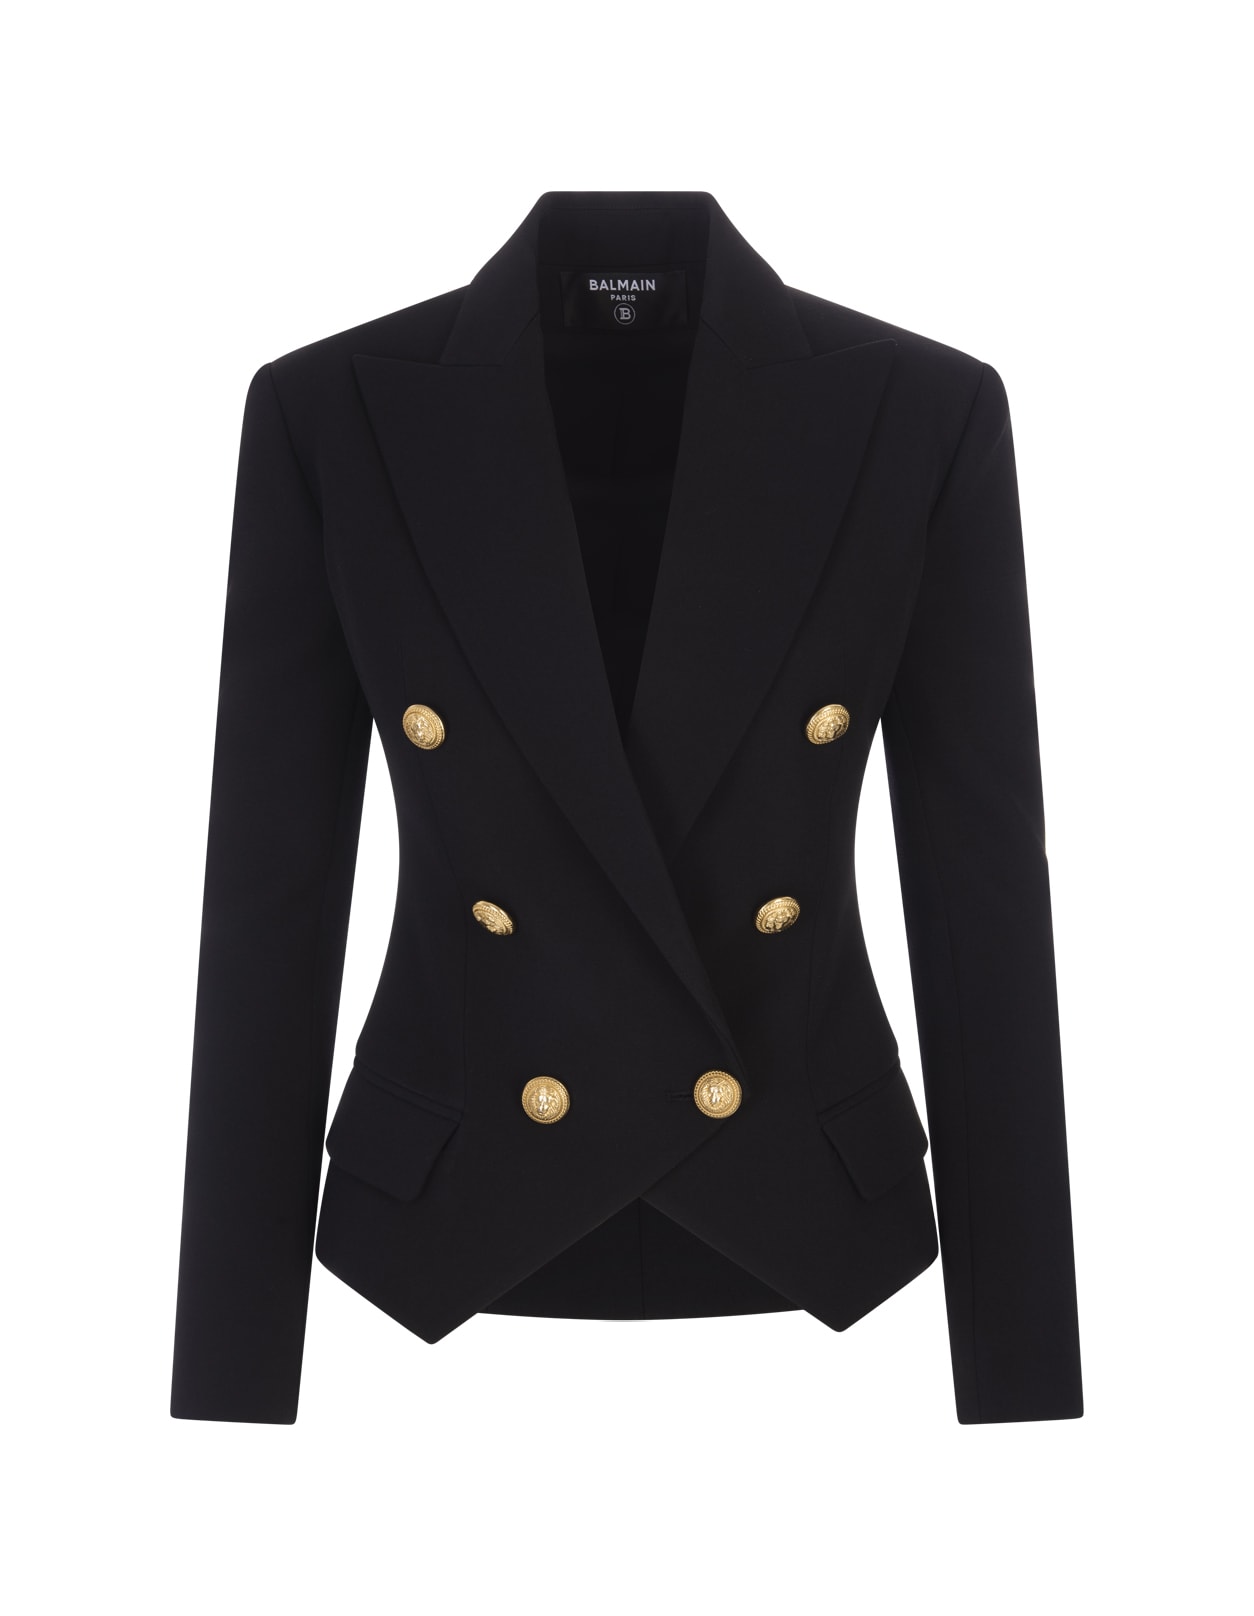 Balmain Woman Double-breasted Blazer In Black Wool With Golden Embossed Buttons